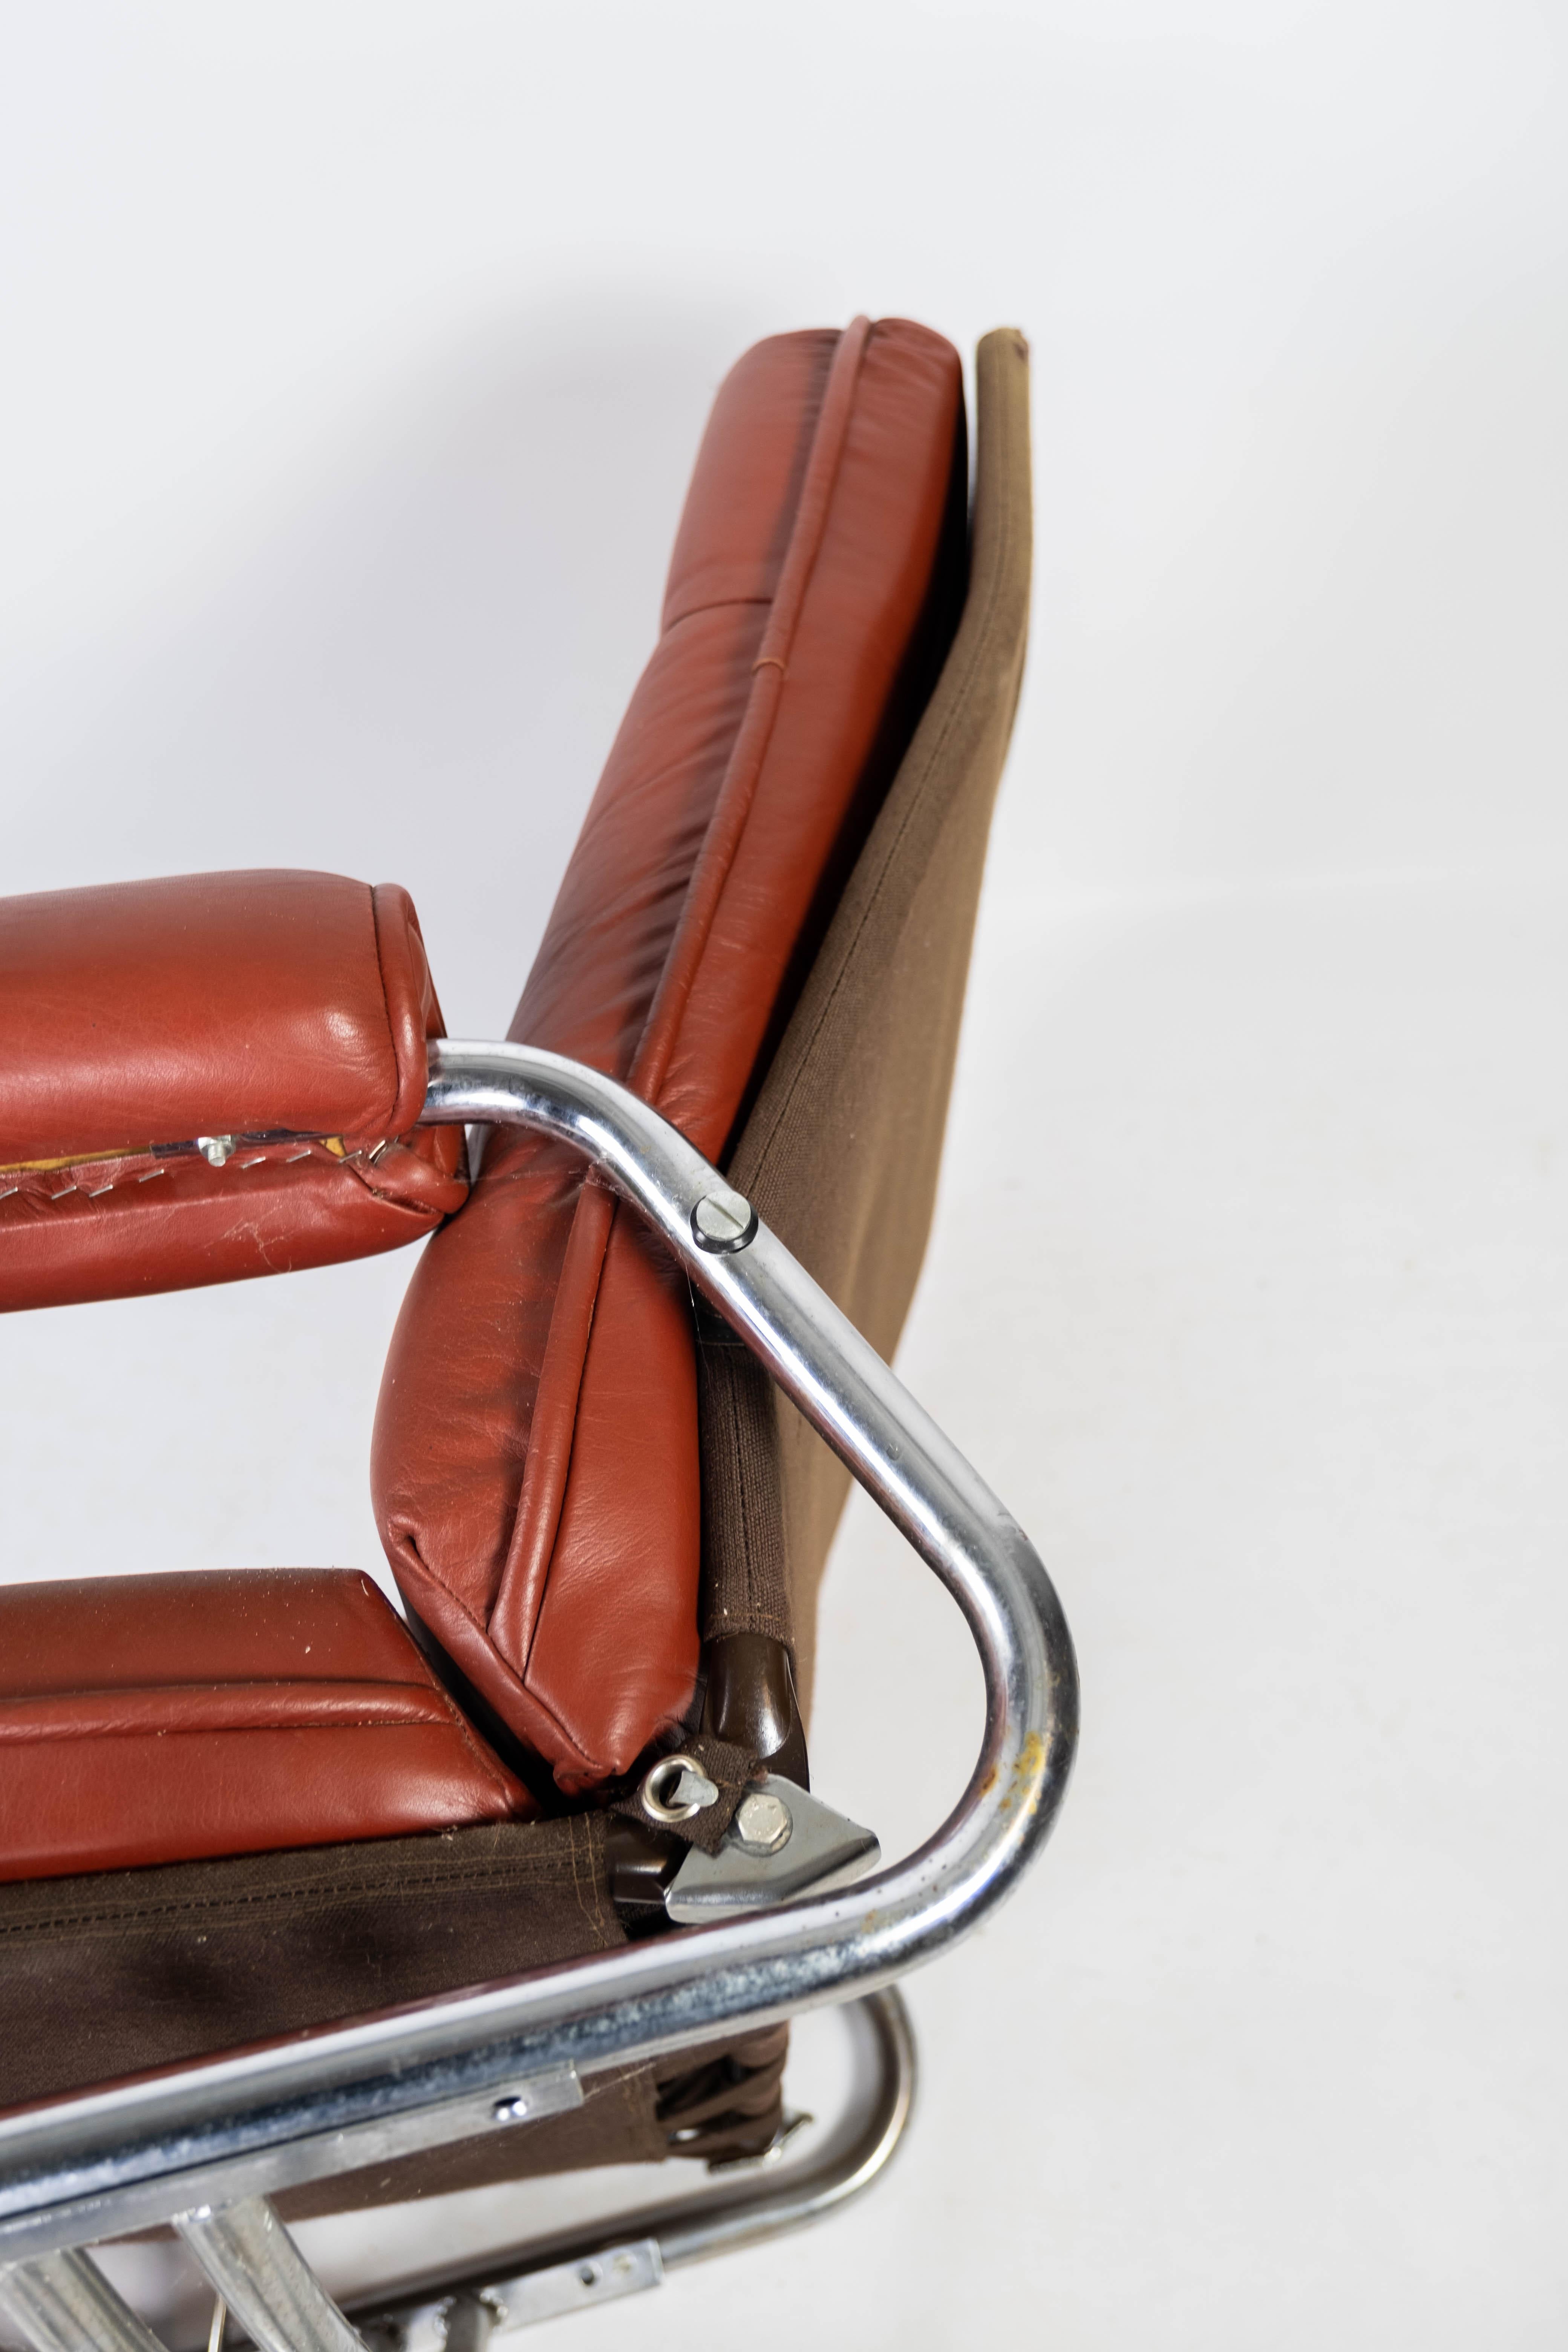 Armchair Upholstered with Red Leather and Frame of Metal, of Danish Design, 1960 For Sale 9